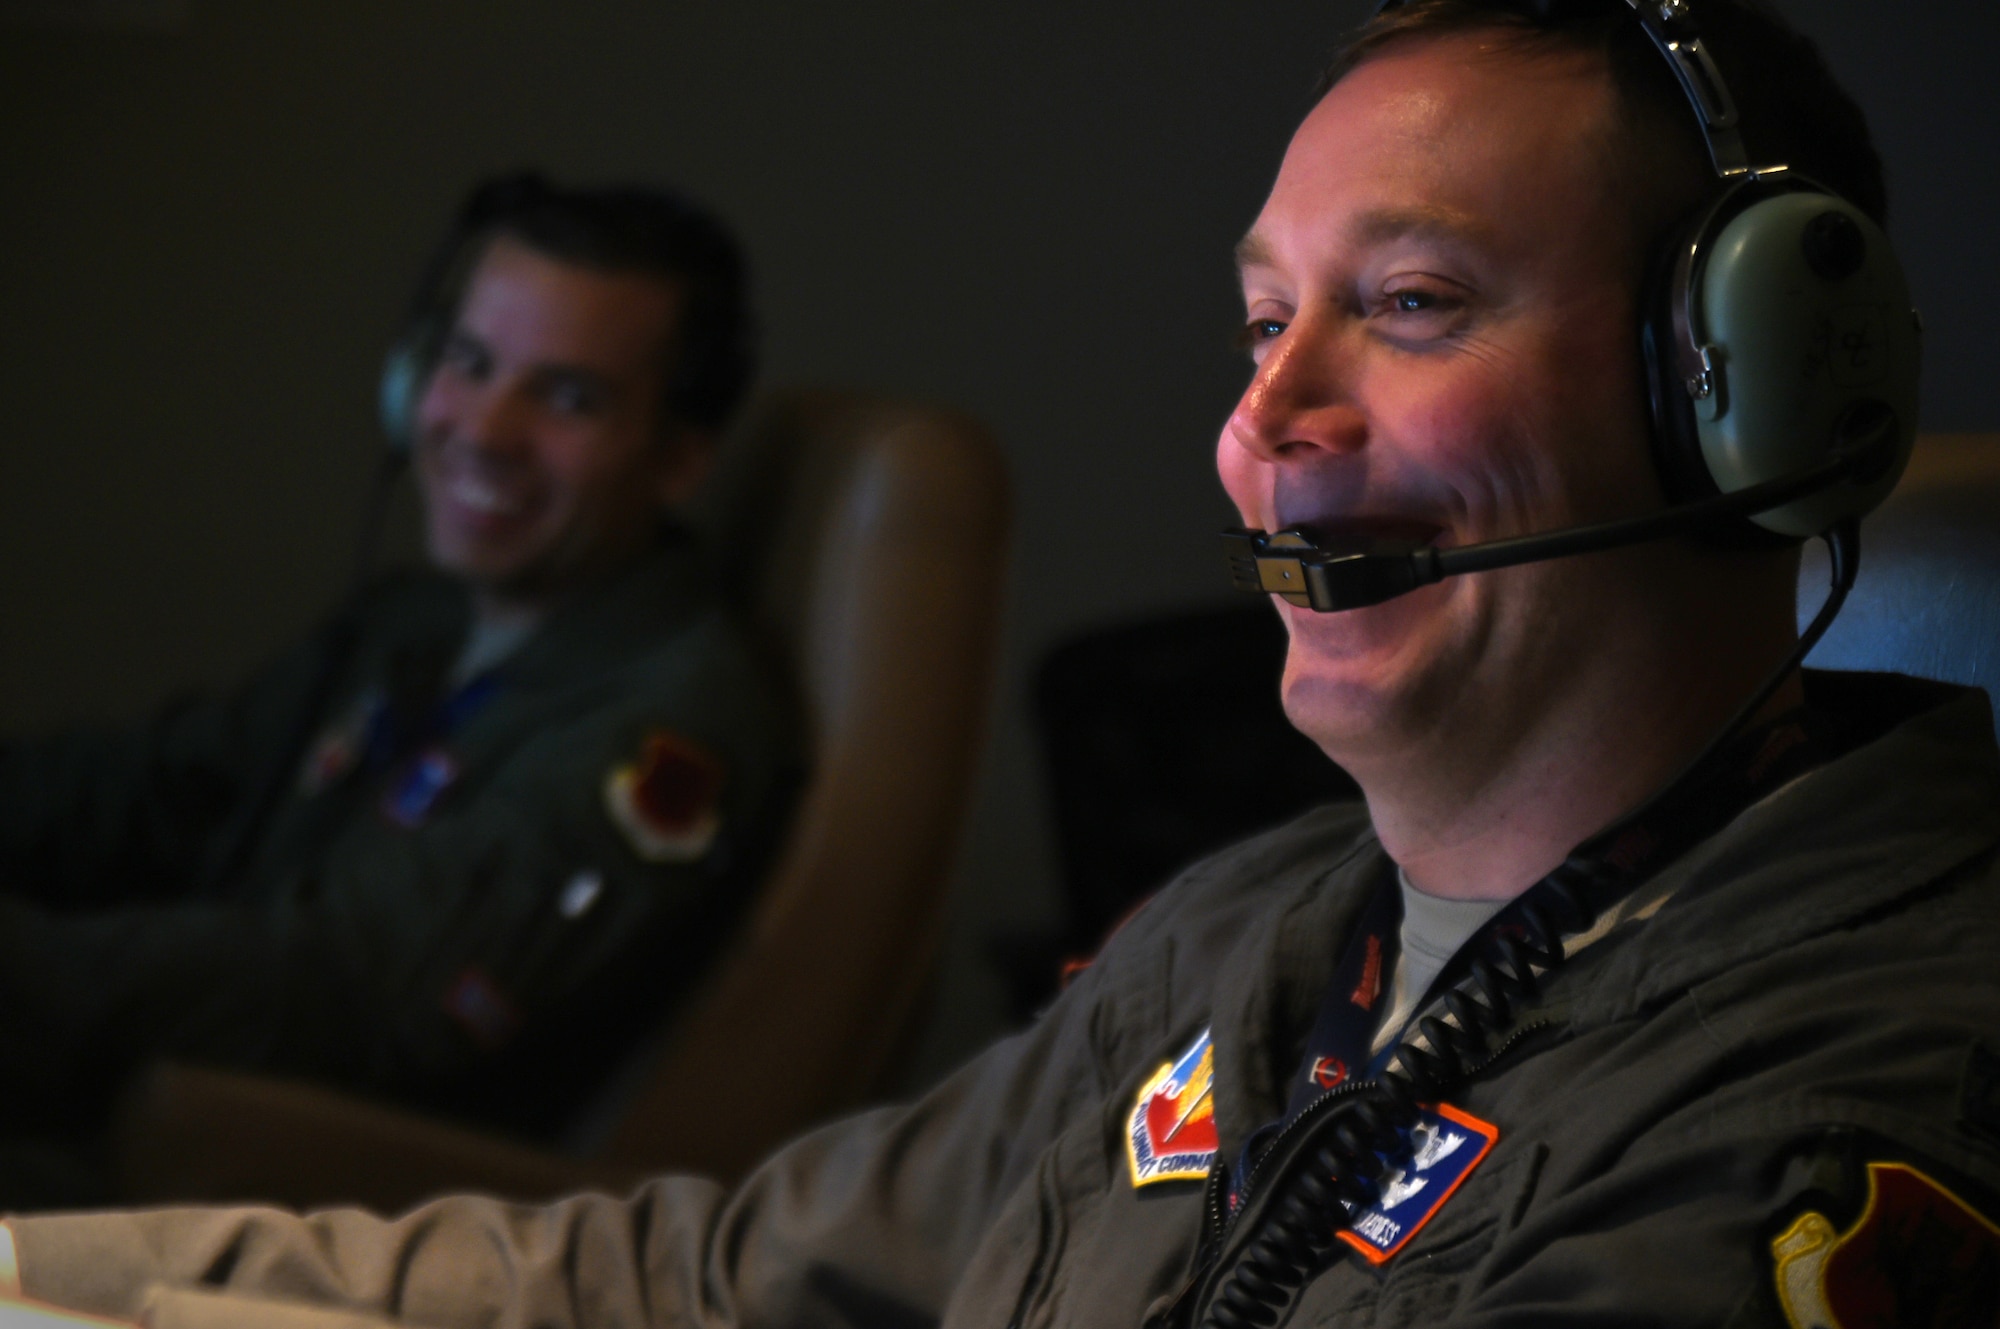 (Left) Staff Sgt. Lloyd, 18th Reconnaissance Squadron MQ-1 Predator sensor operator and Capt. Benjamin, 18th RS MQ-1 Predator pilot (right), laugh while flying a remotely piloted aircraft training sortie in support of Red Flag 15-3 at Creech Air Force Base, Nevada on July 23, 2015. The goal of participating in Red Flag exercises is to fully integrate RPAs into large force exercises (LFEs), to include educating other major weapon systems (MWS) communities on the RPA capabilities to enable mission essential support for war planners. (U.S. Air Force photo by Tech. Sgt. Nadine Barclay)